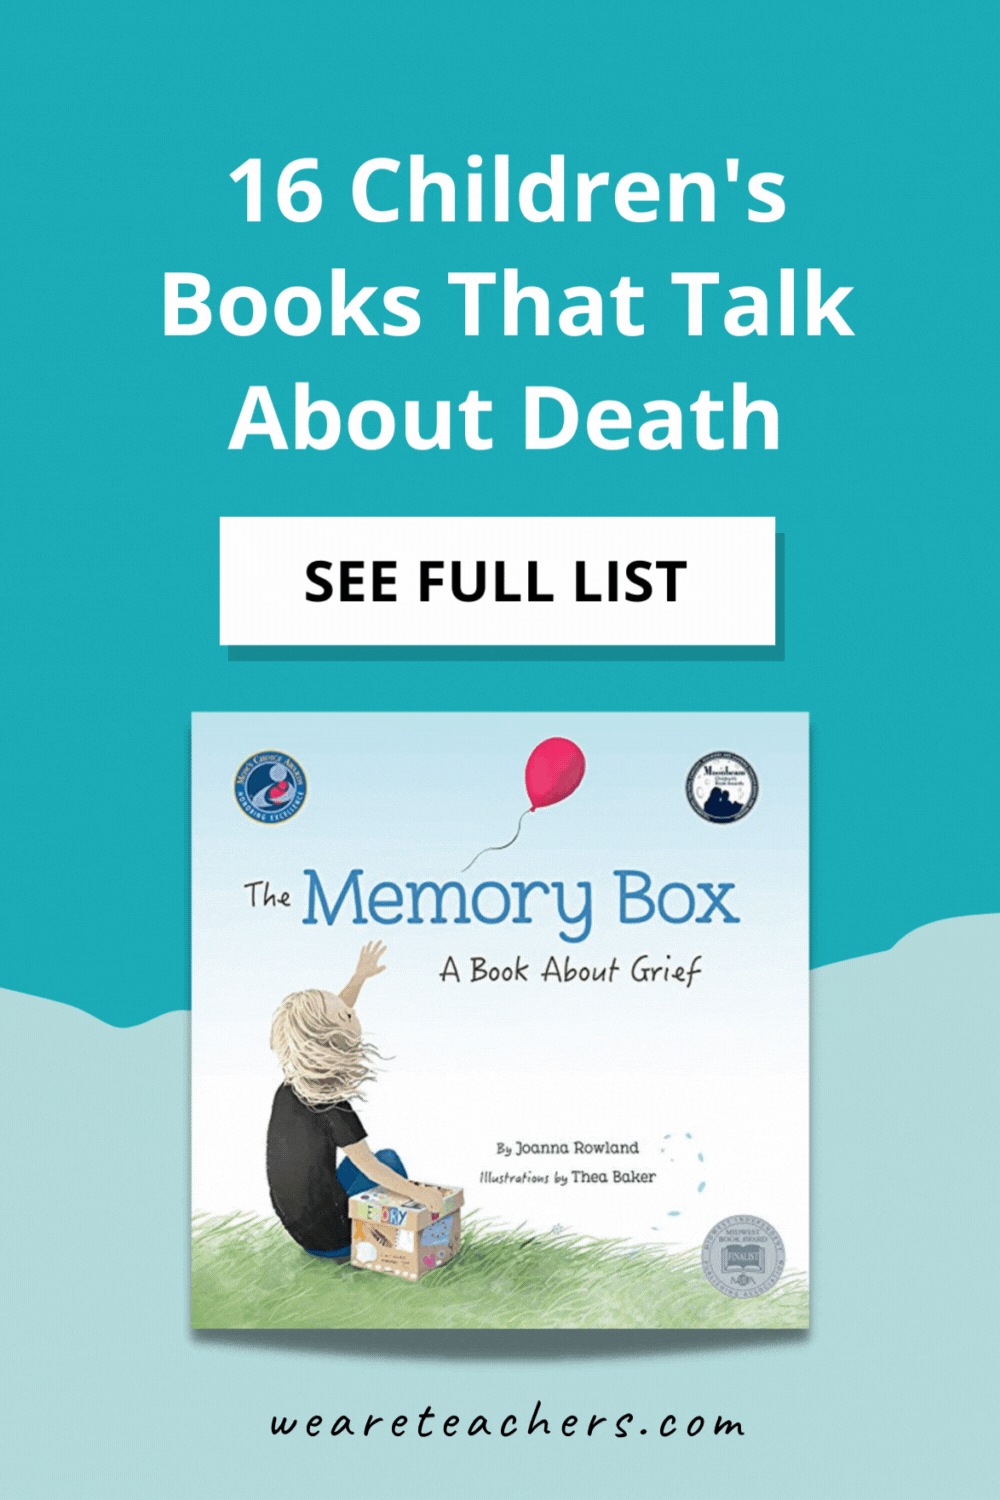 These children's books about death tackle how to process death and how to grieve in a way that helps the healing process.